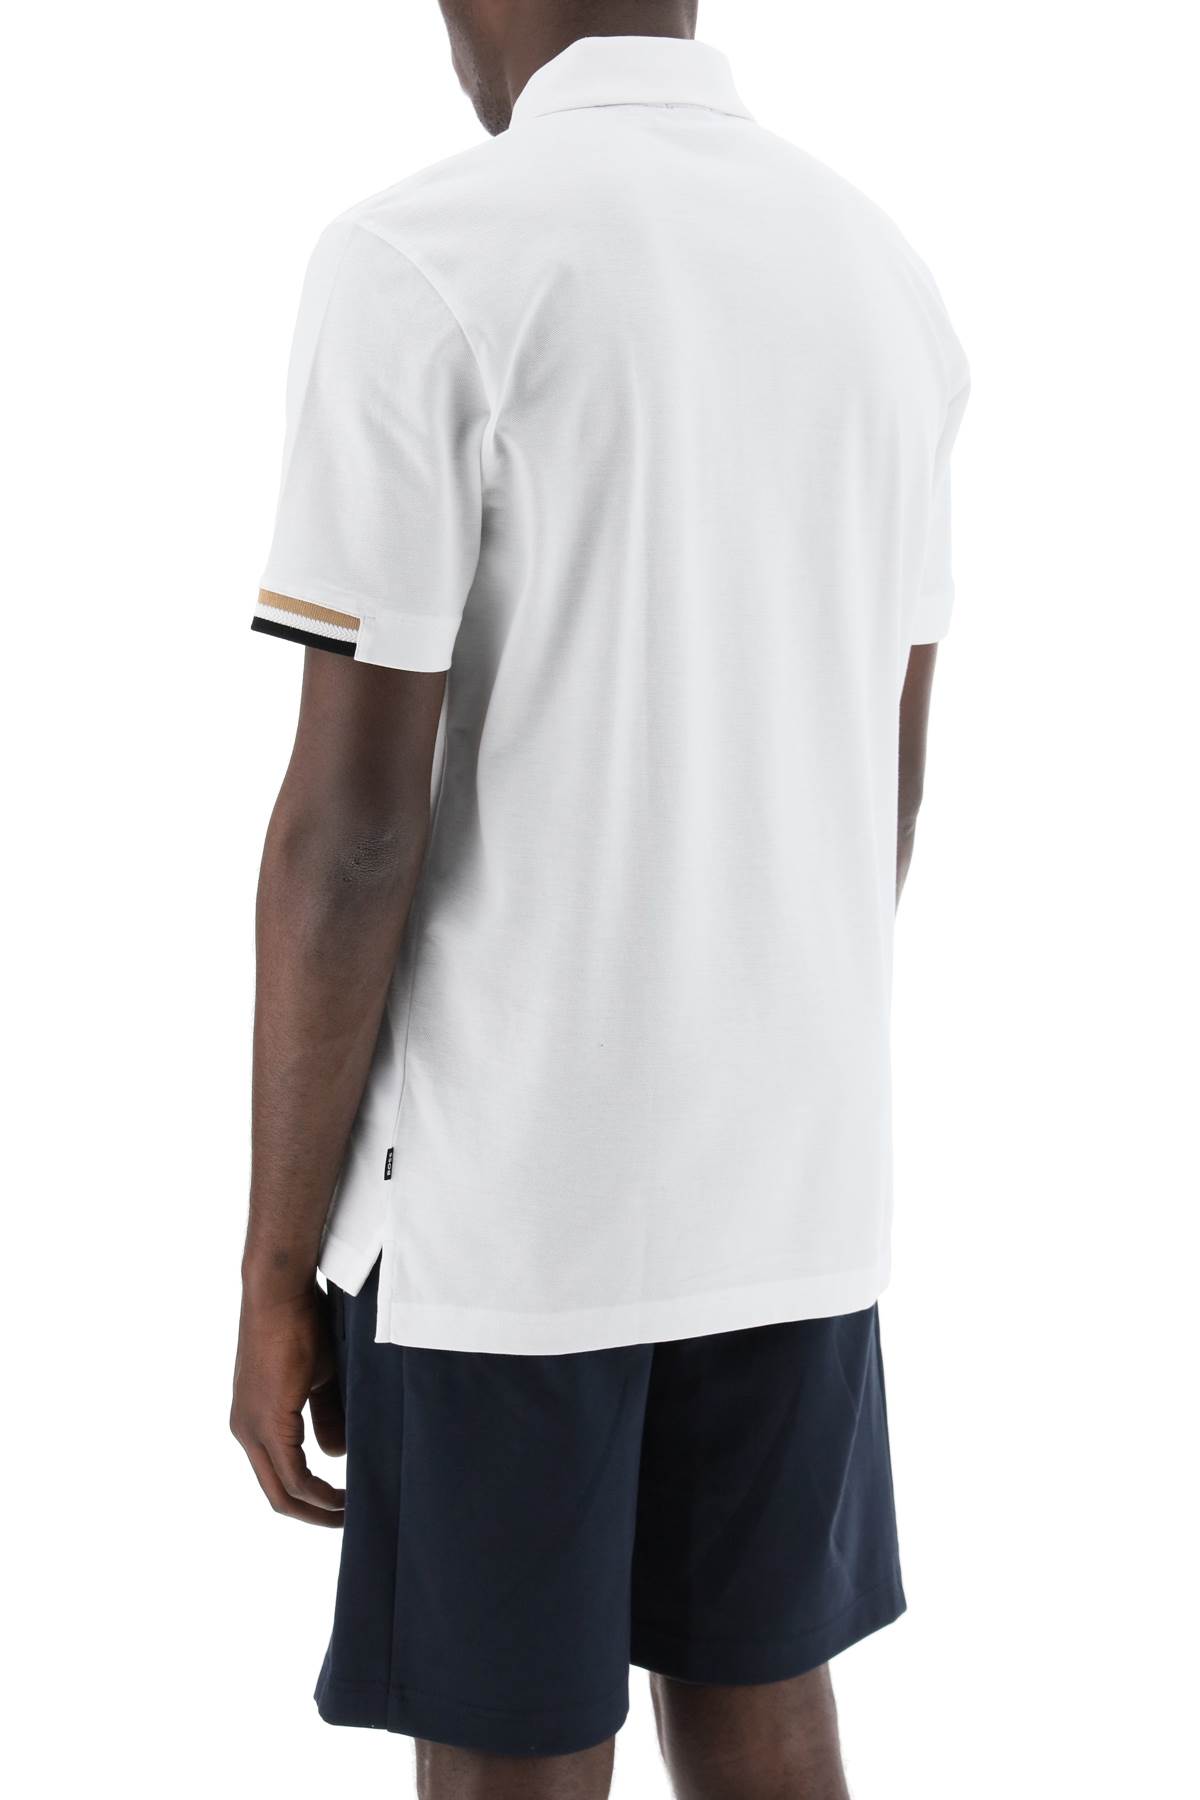 Shop Hugo Boss Parlay Polo Shirt With Stripe Detail In White (white)